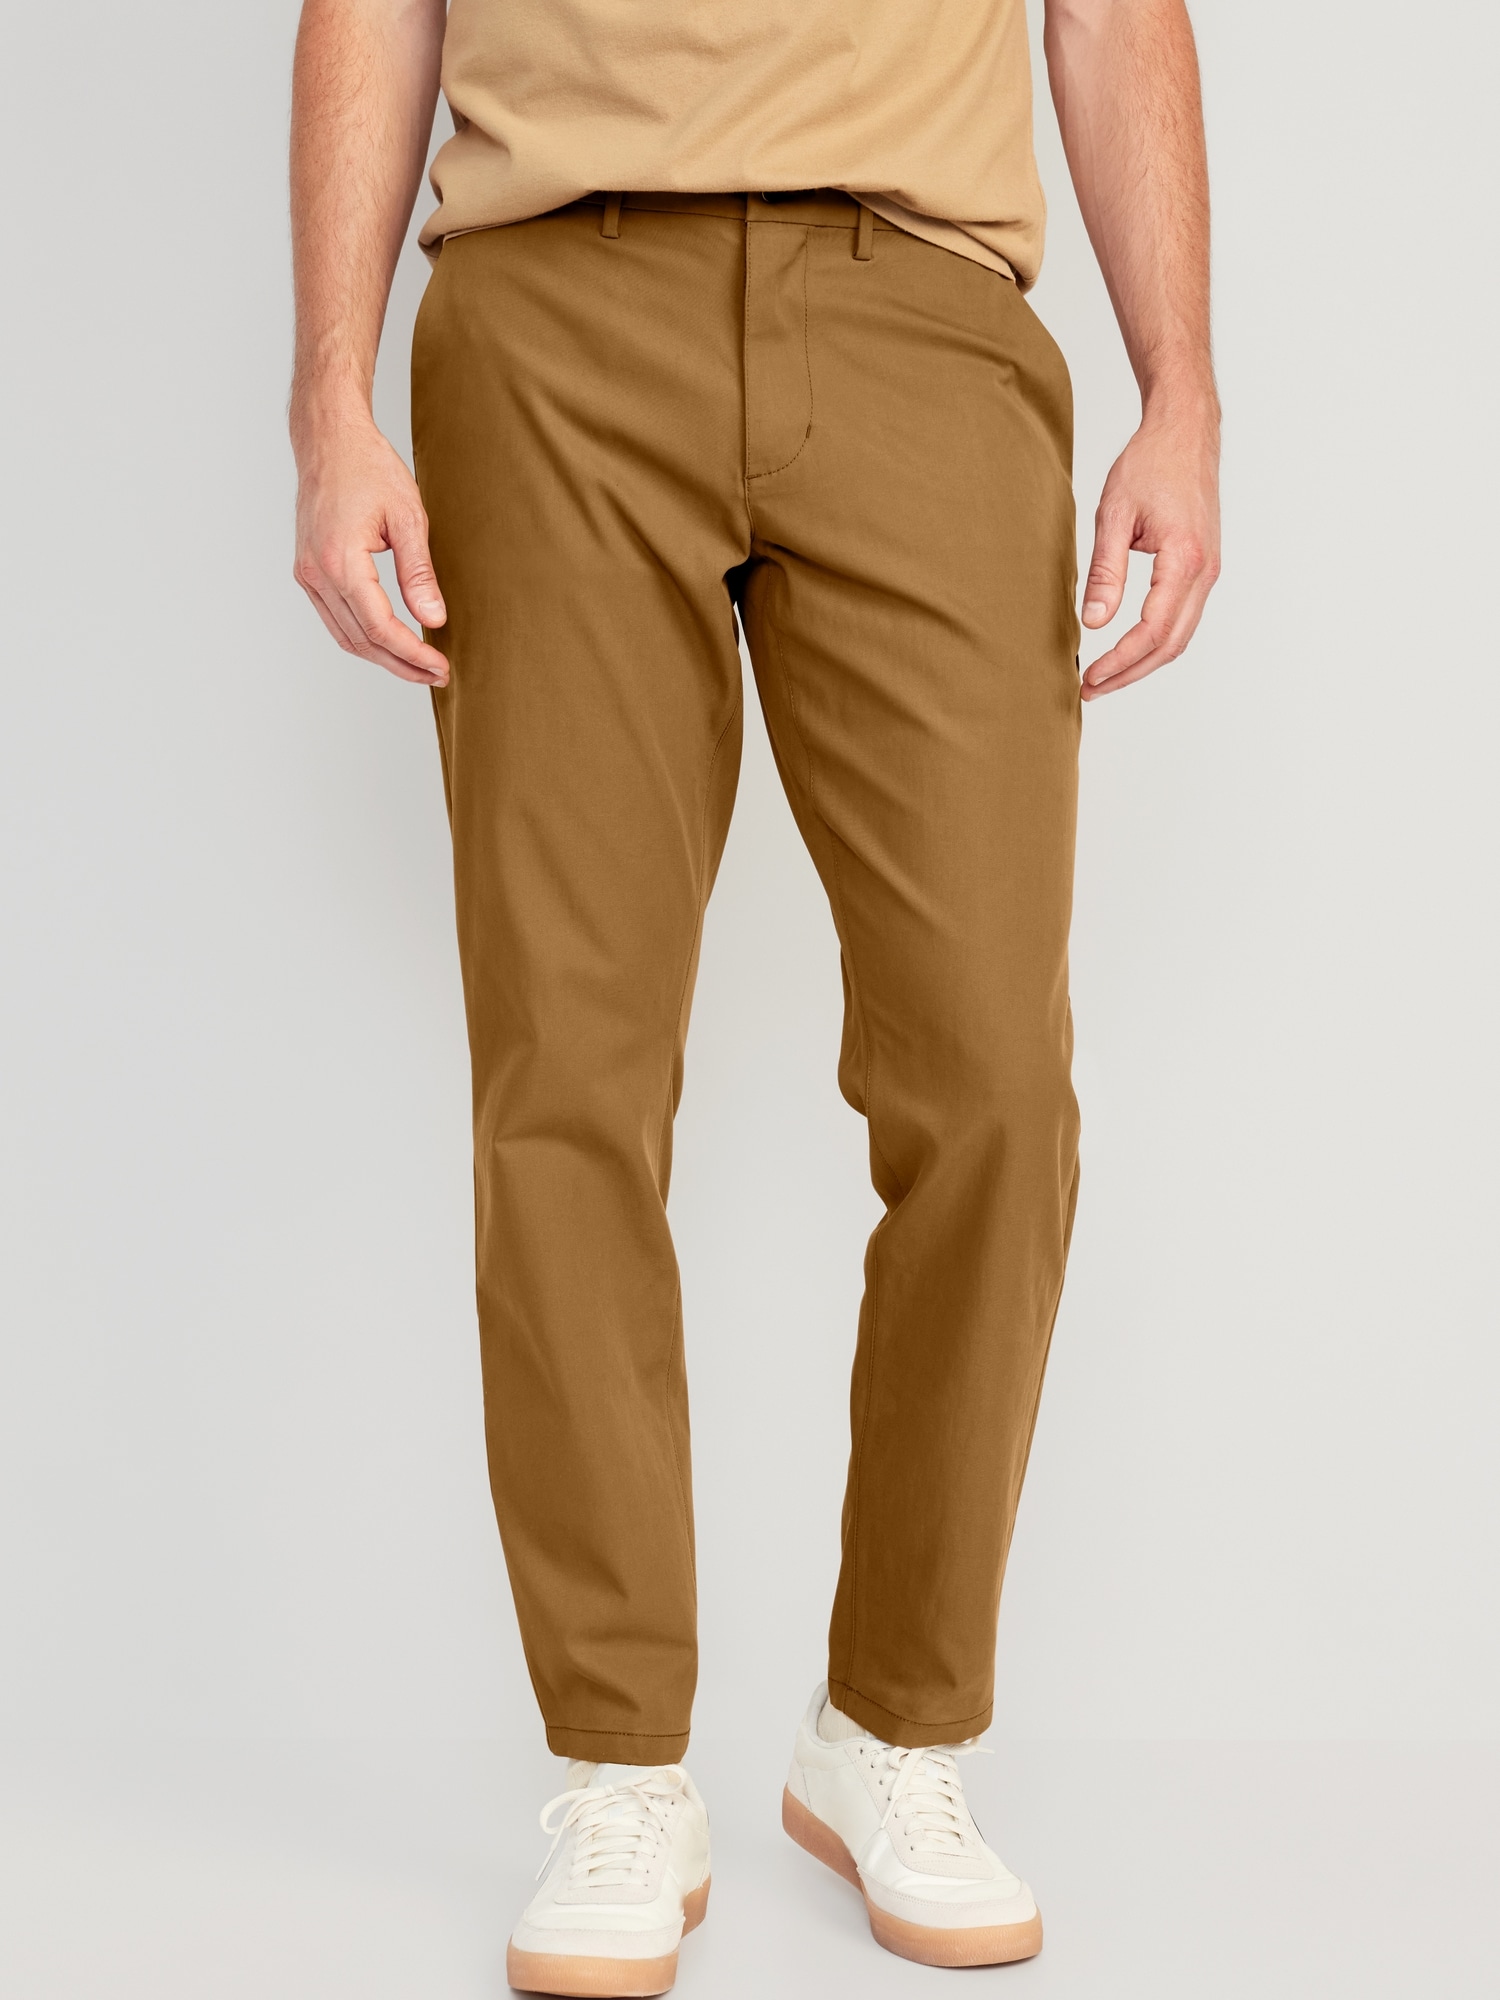 Athletic Ultimate Tech Built-In Flex Chino Pants for Men